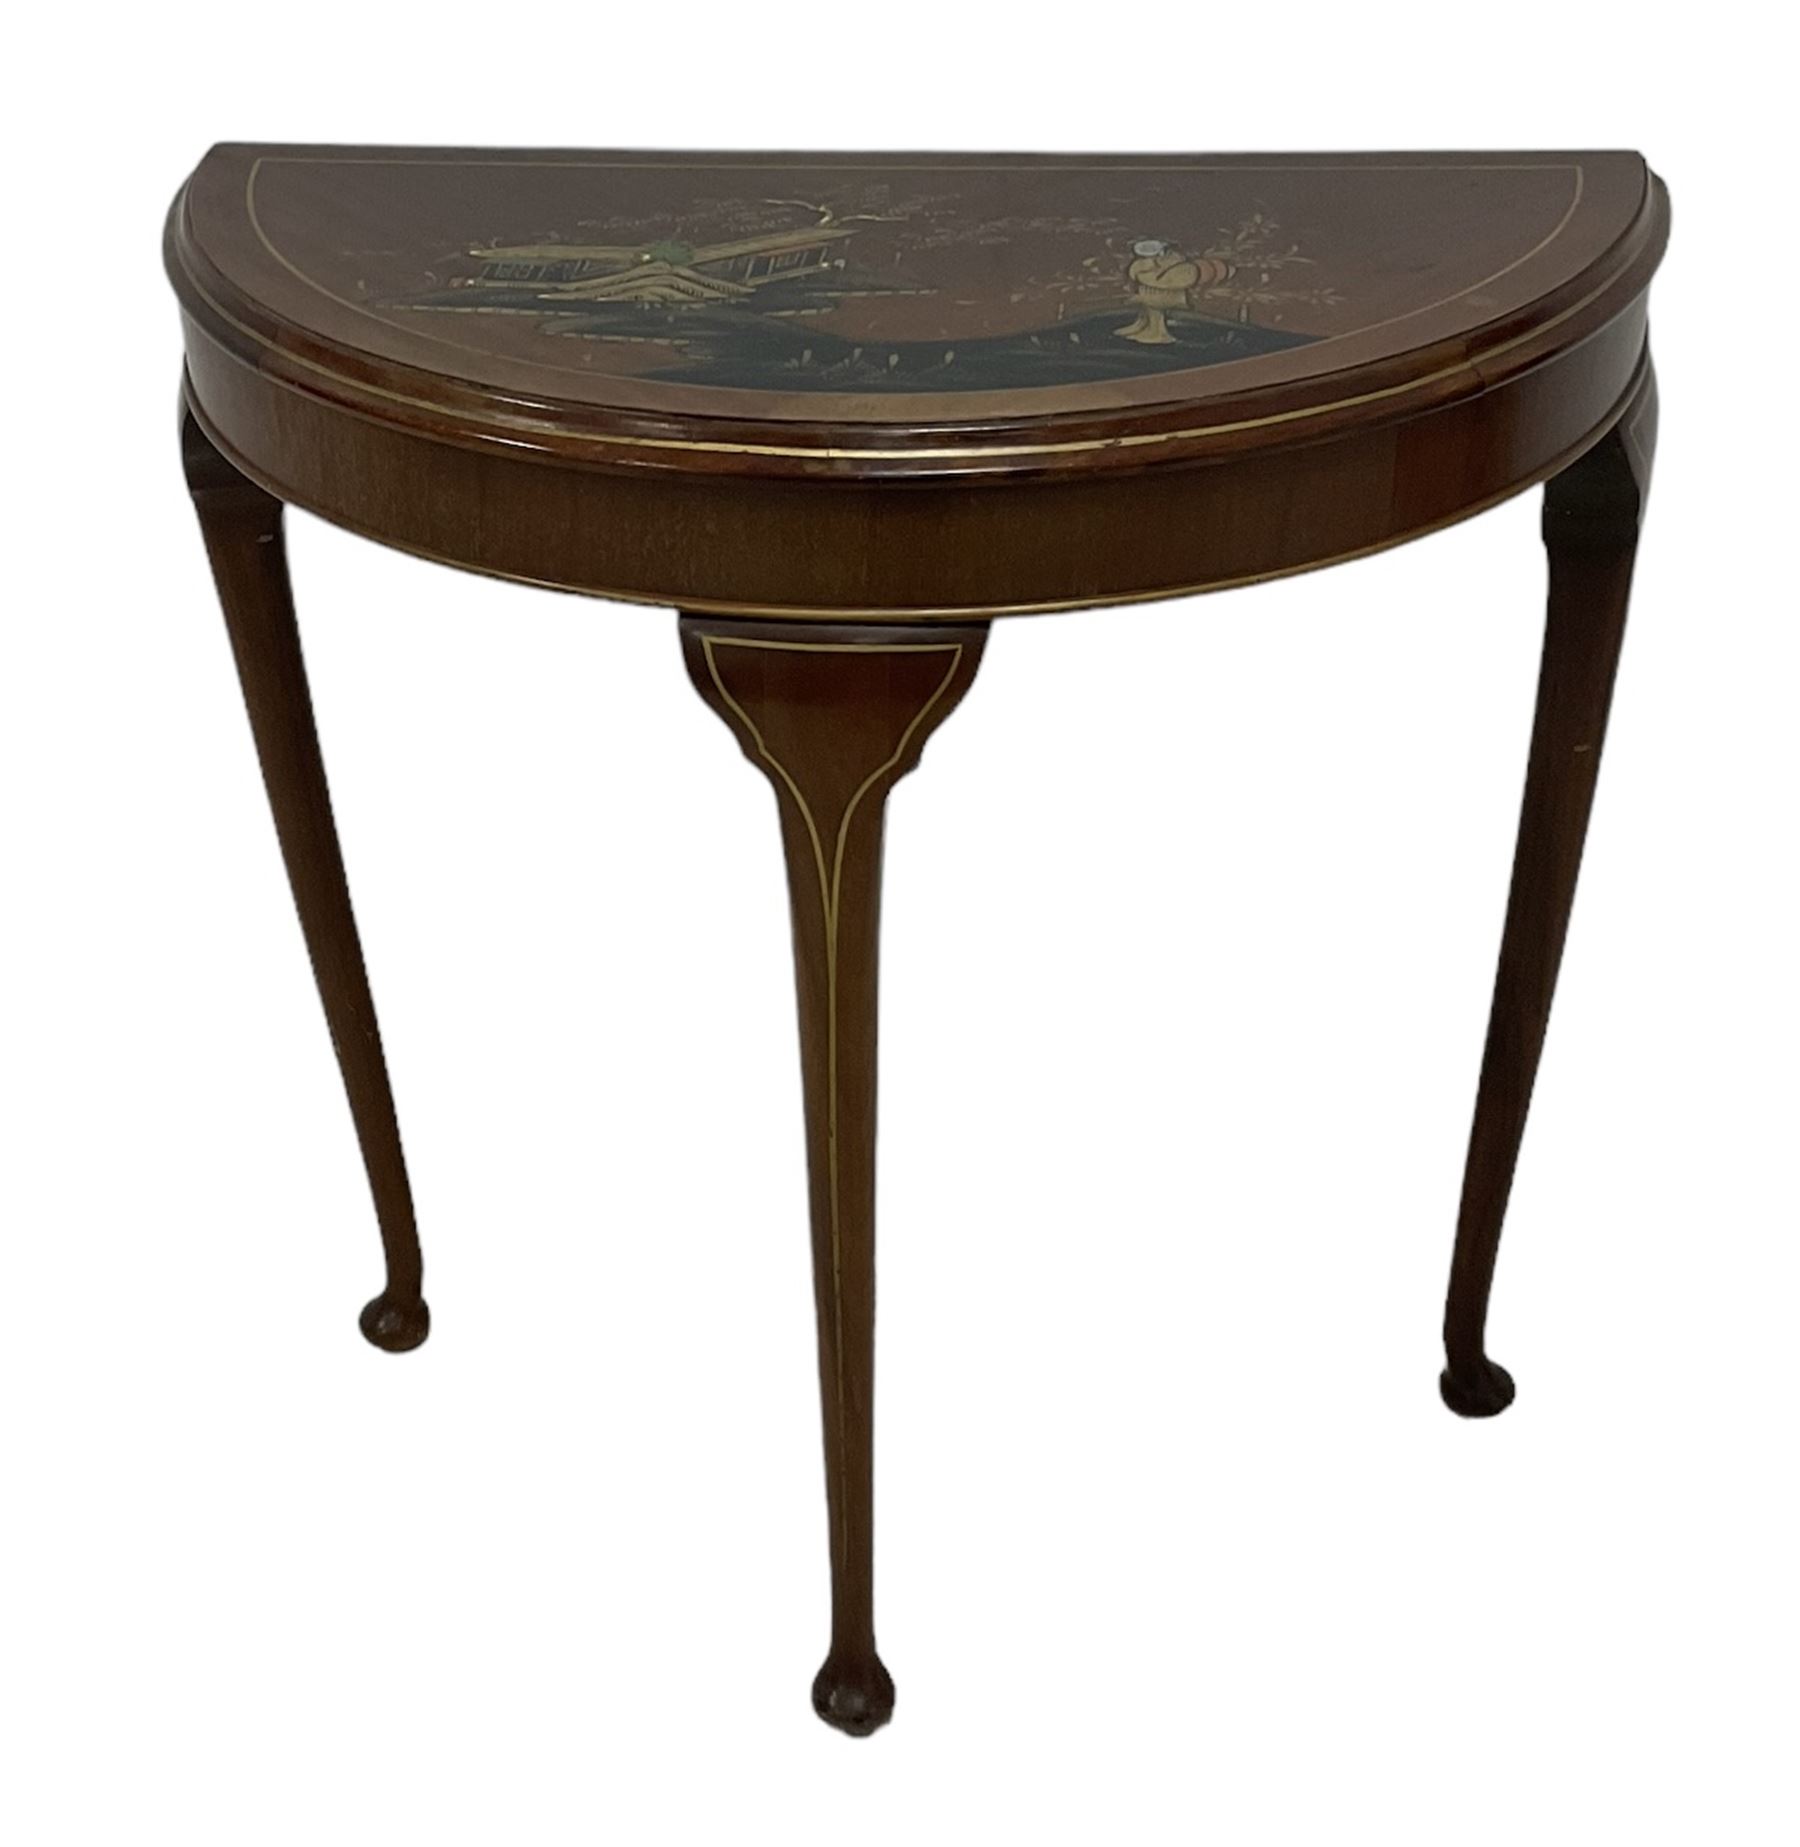 Early to mid-20th century demi-lune mahogany console table